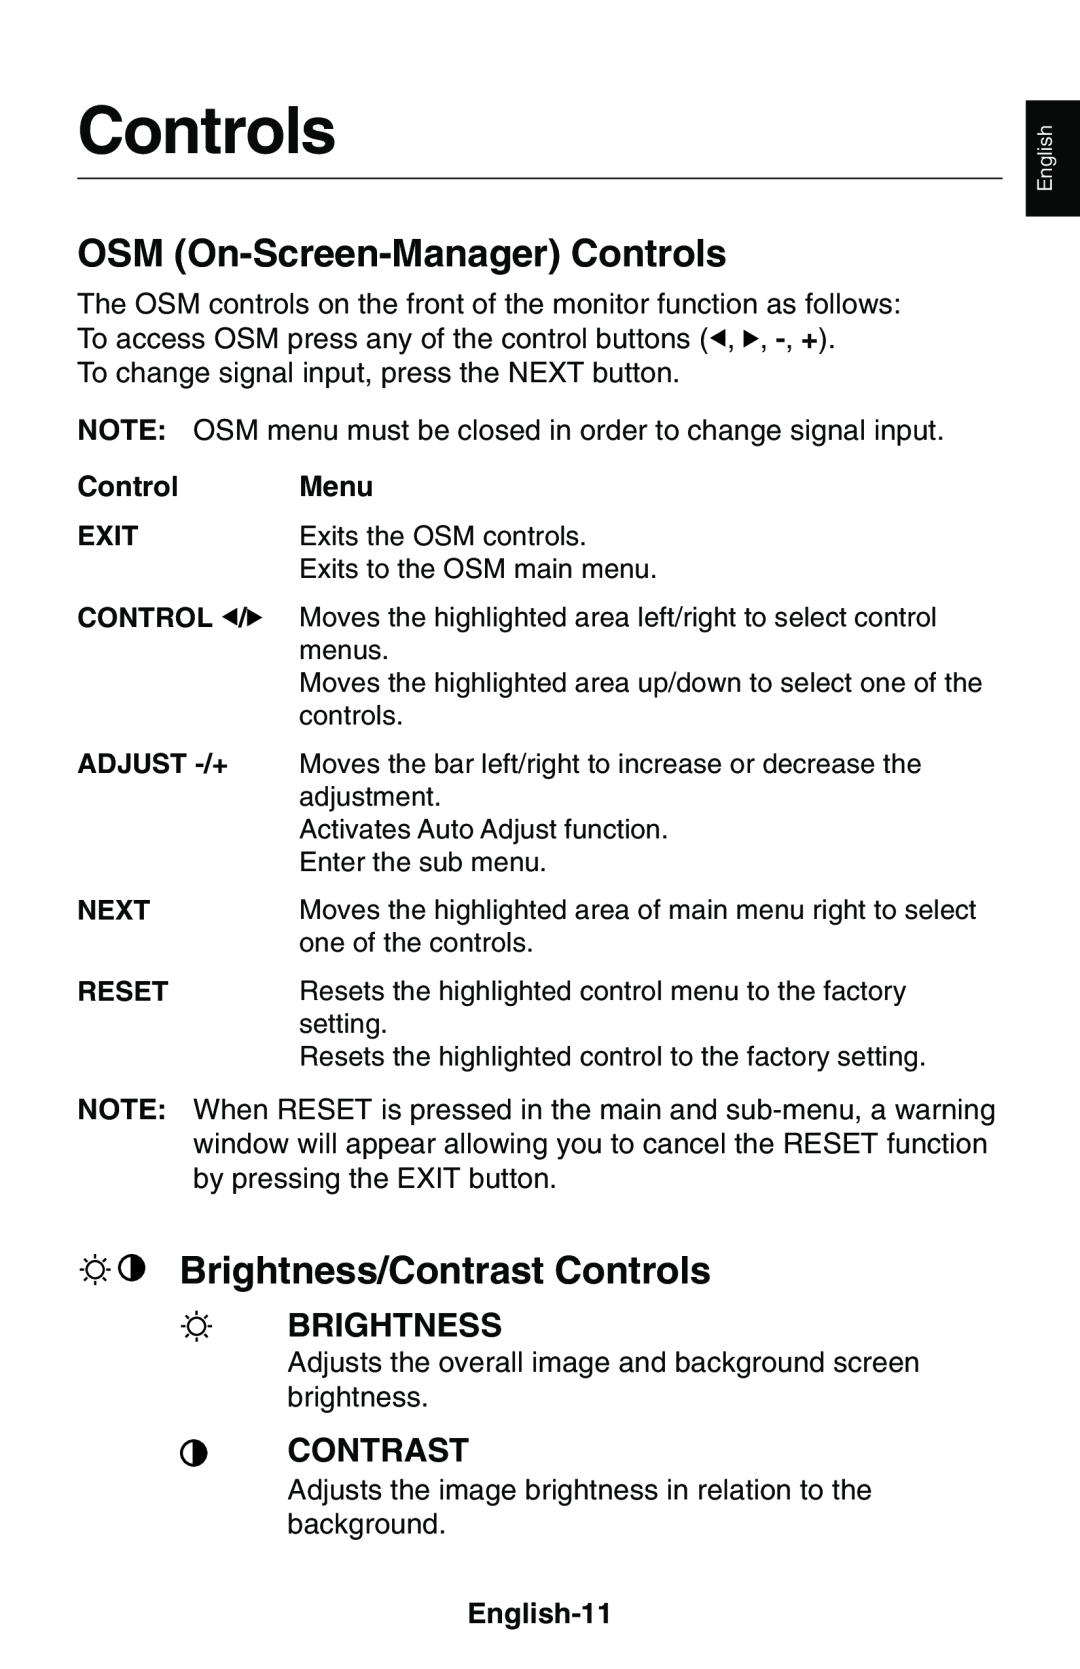 NEC LCD1850E user manual OSM On-Screen-Manager Controls, Brightness/Contrast Controls 